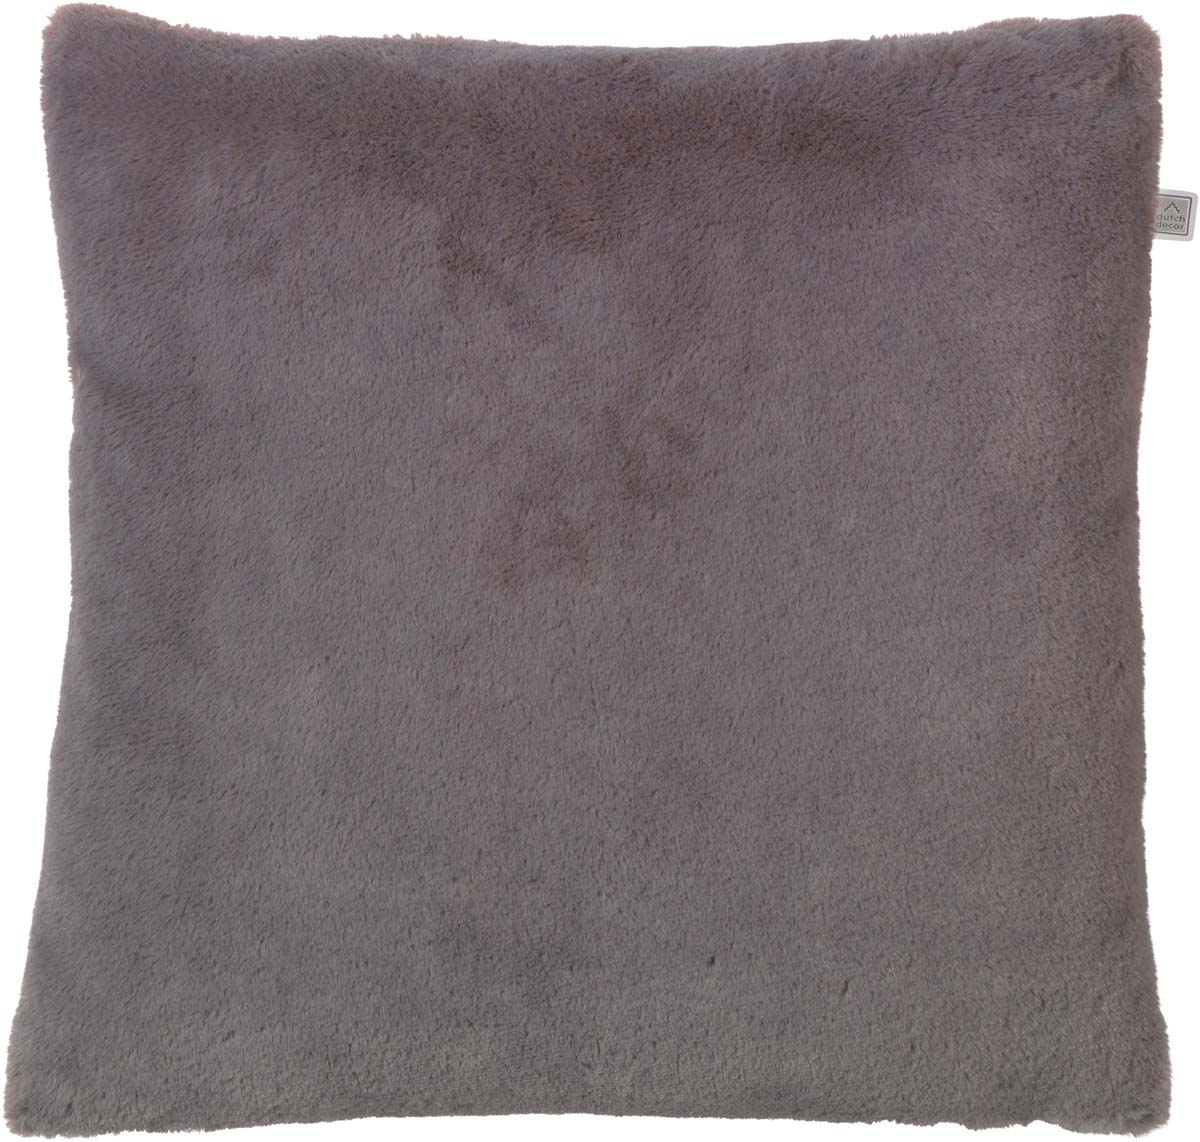 AALTO - Kussenhoes taupe 45x45 cm